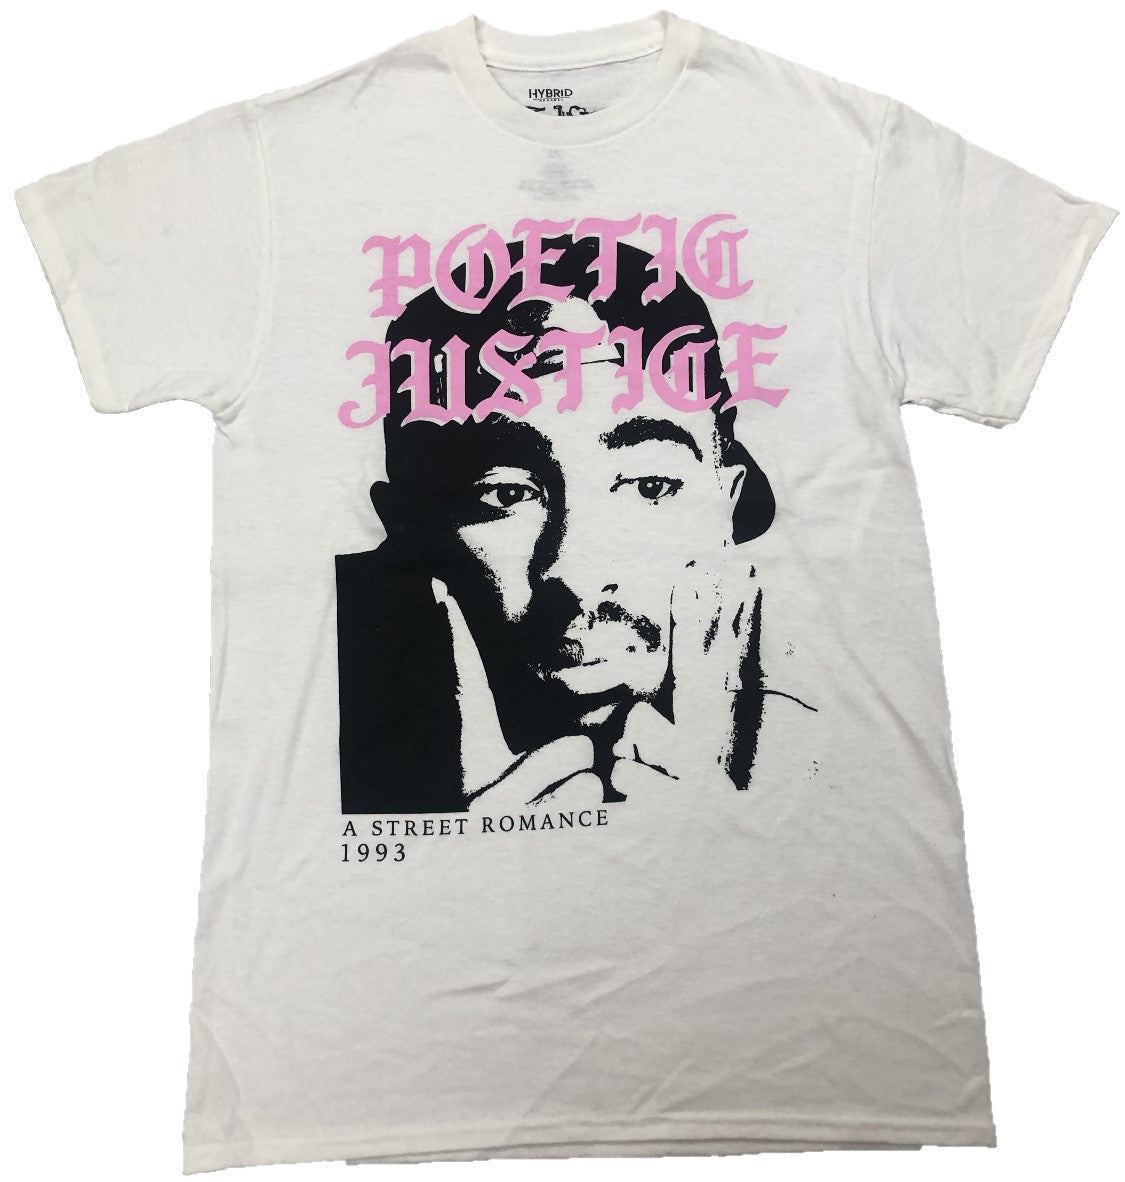 2PAC Poetic Justice A Street Romance 1993 Mens T-Shirt (White)